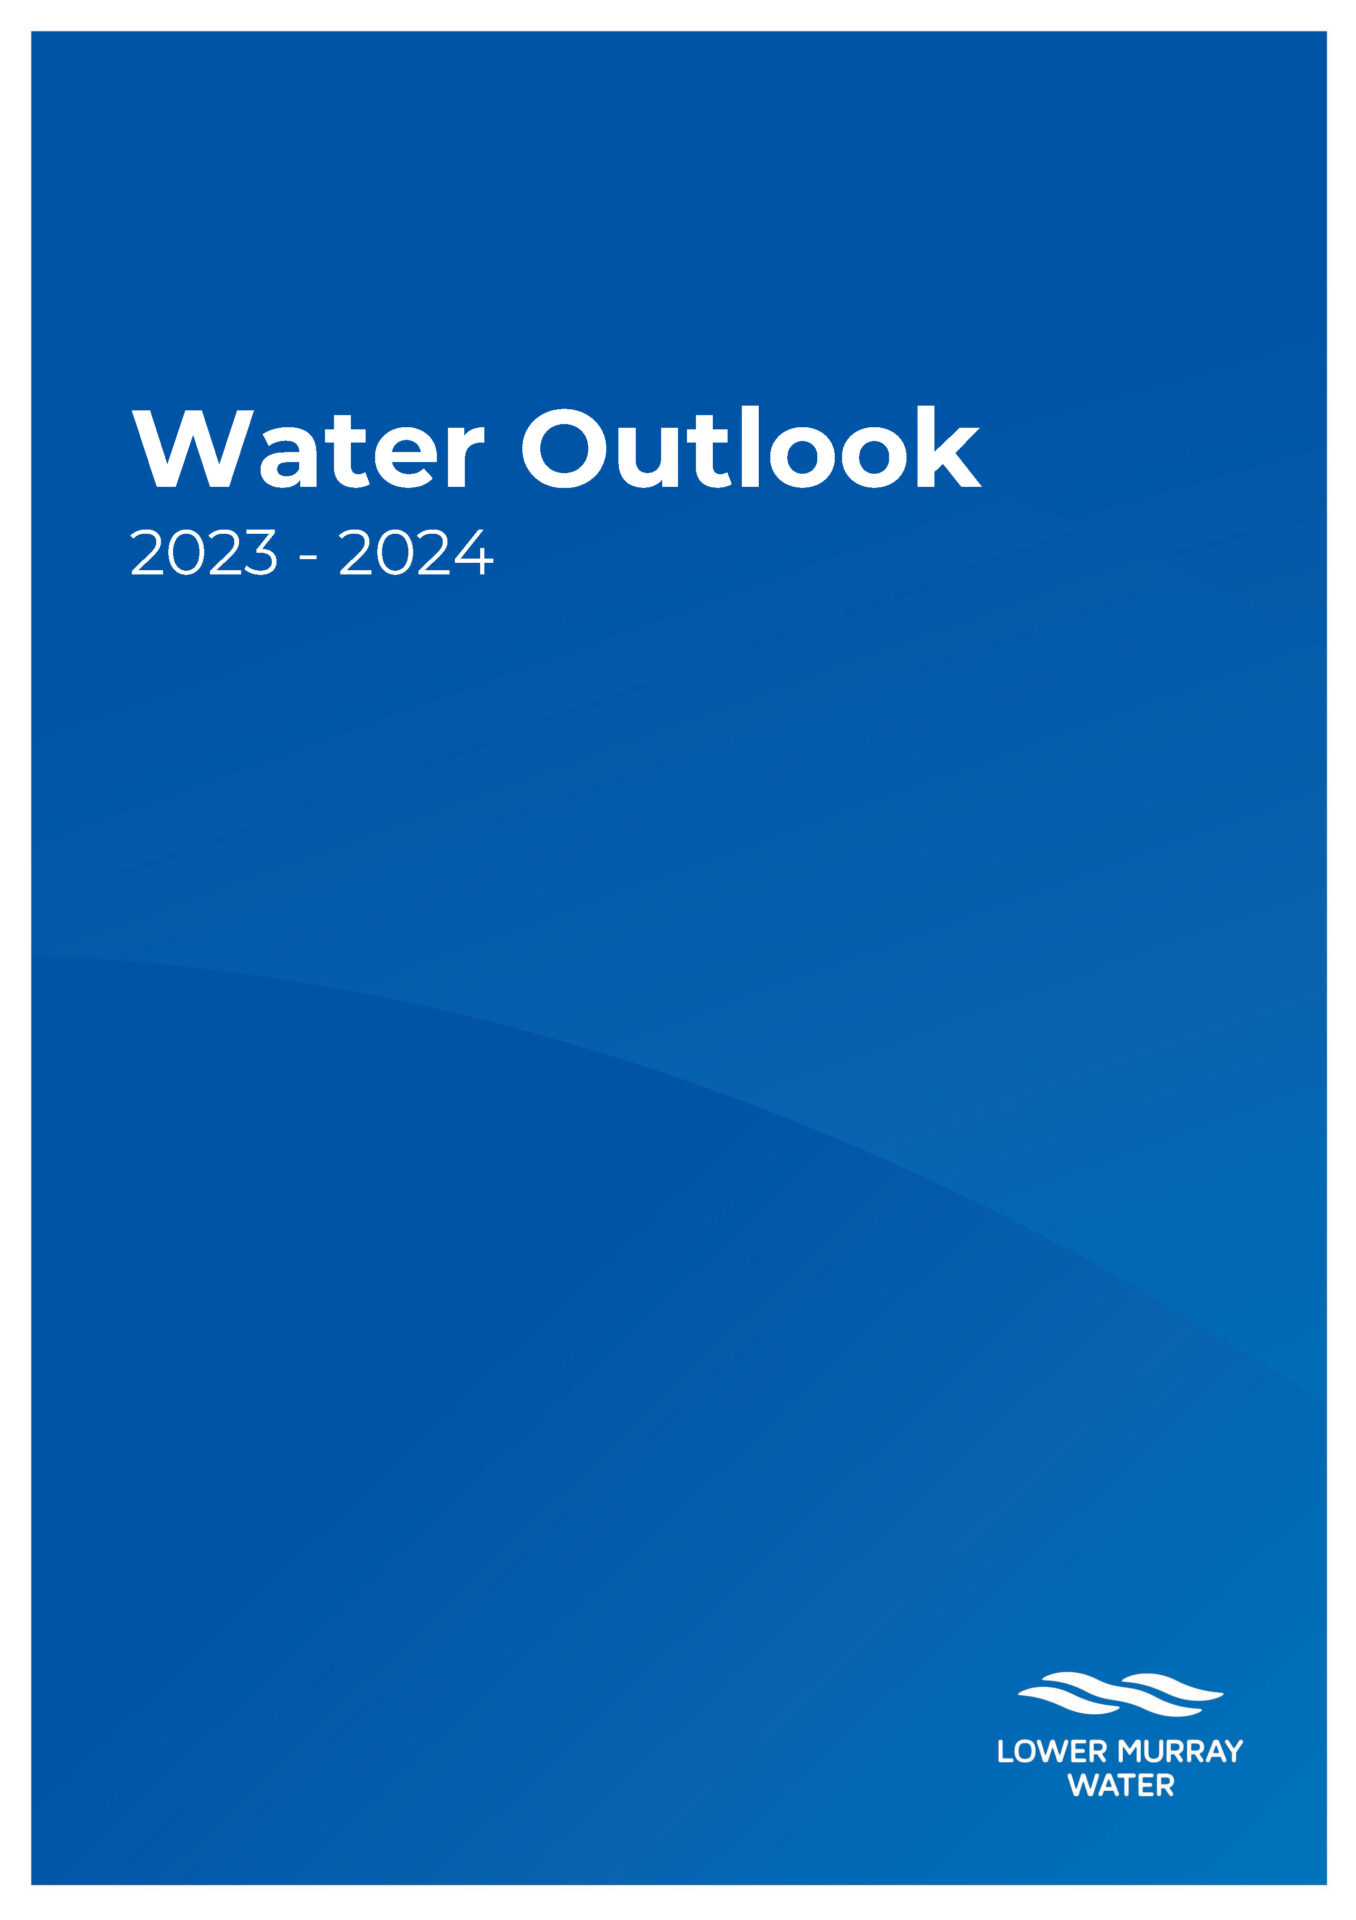 Water Security Outlook